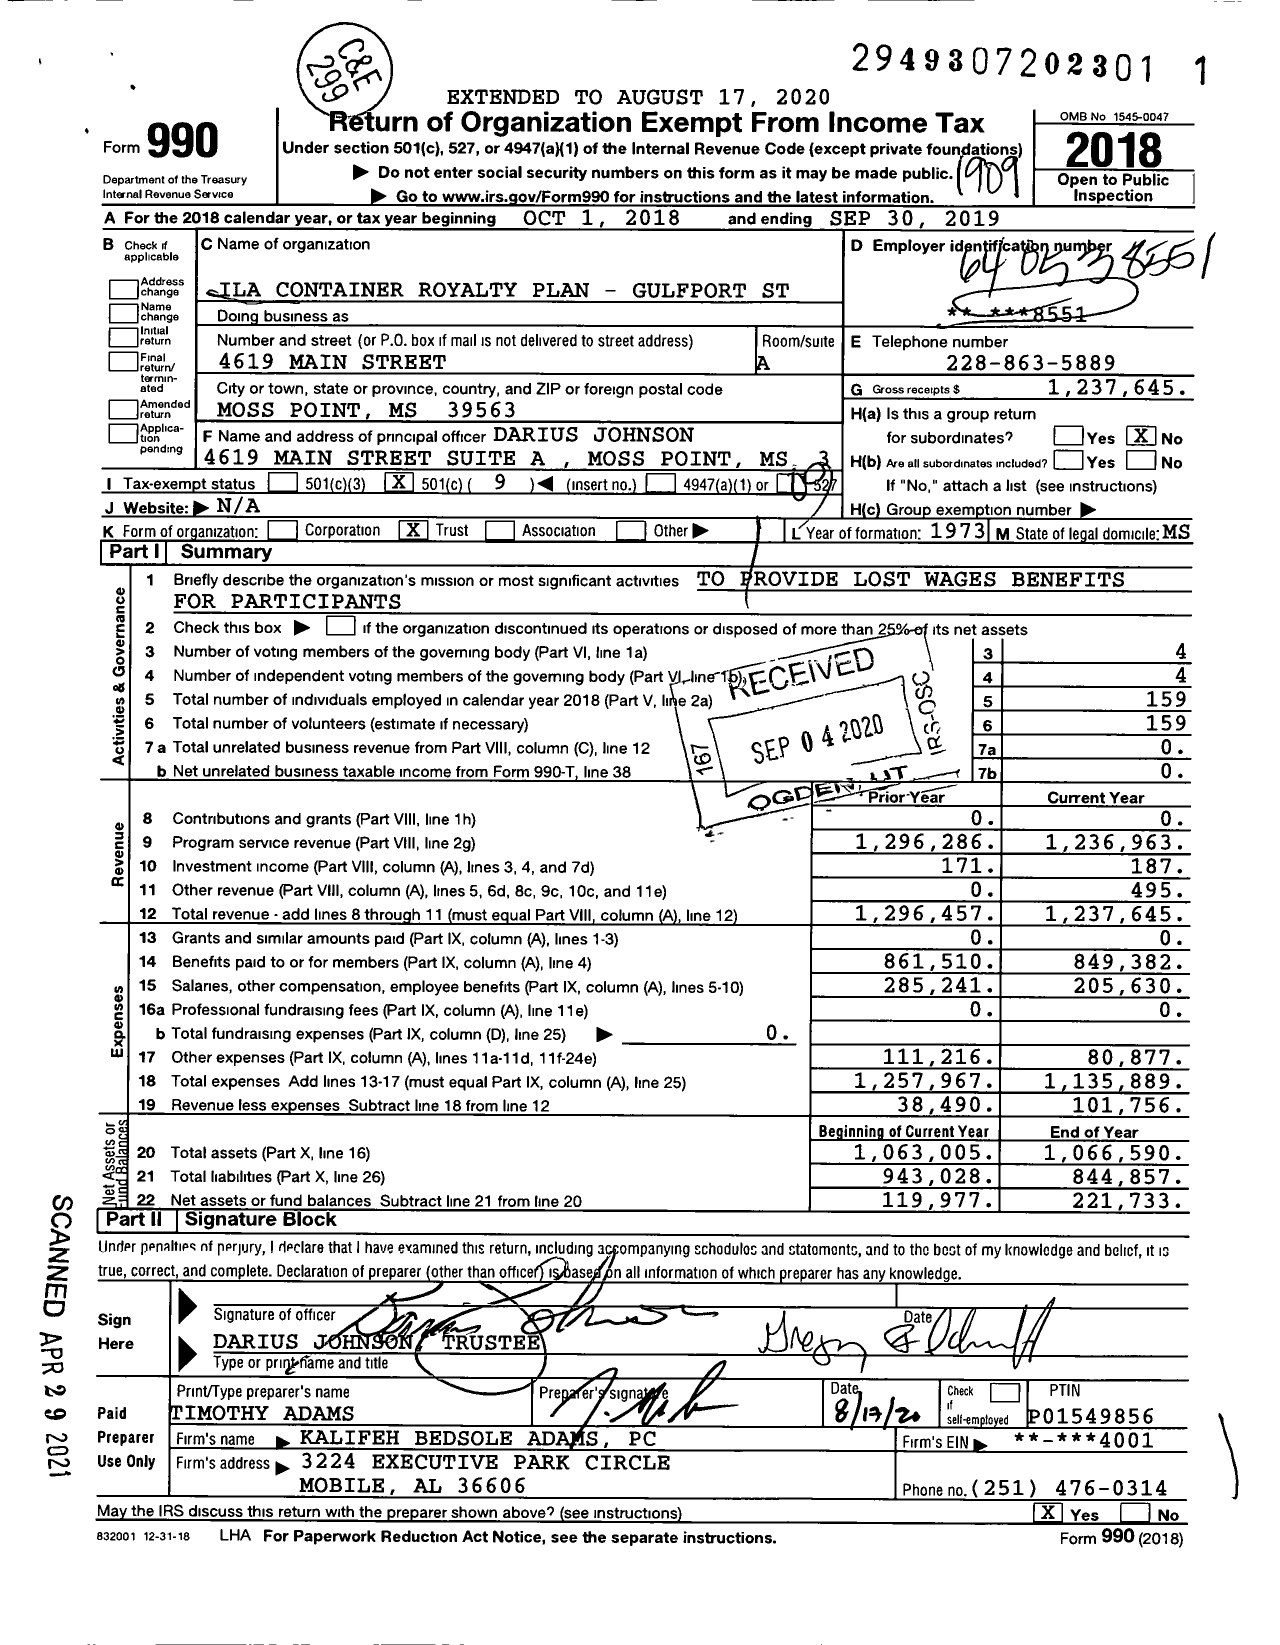 Image of first page of 2018 Form 990O for Ila Container Royalty Plan-Gulfport St